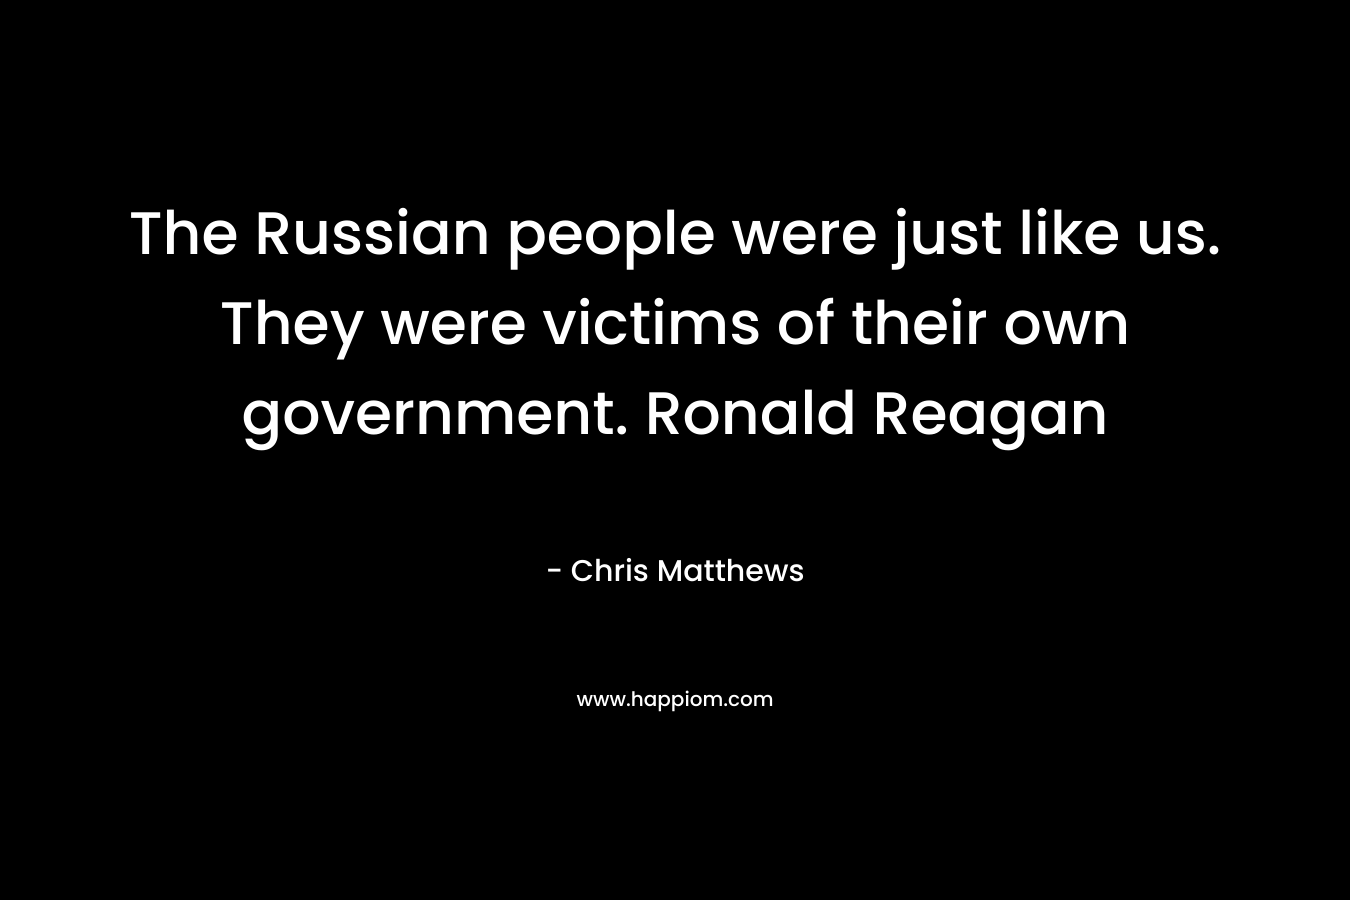 The Russian people were just like us. They were victims of their own government. Ronald Reagan